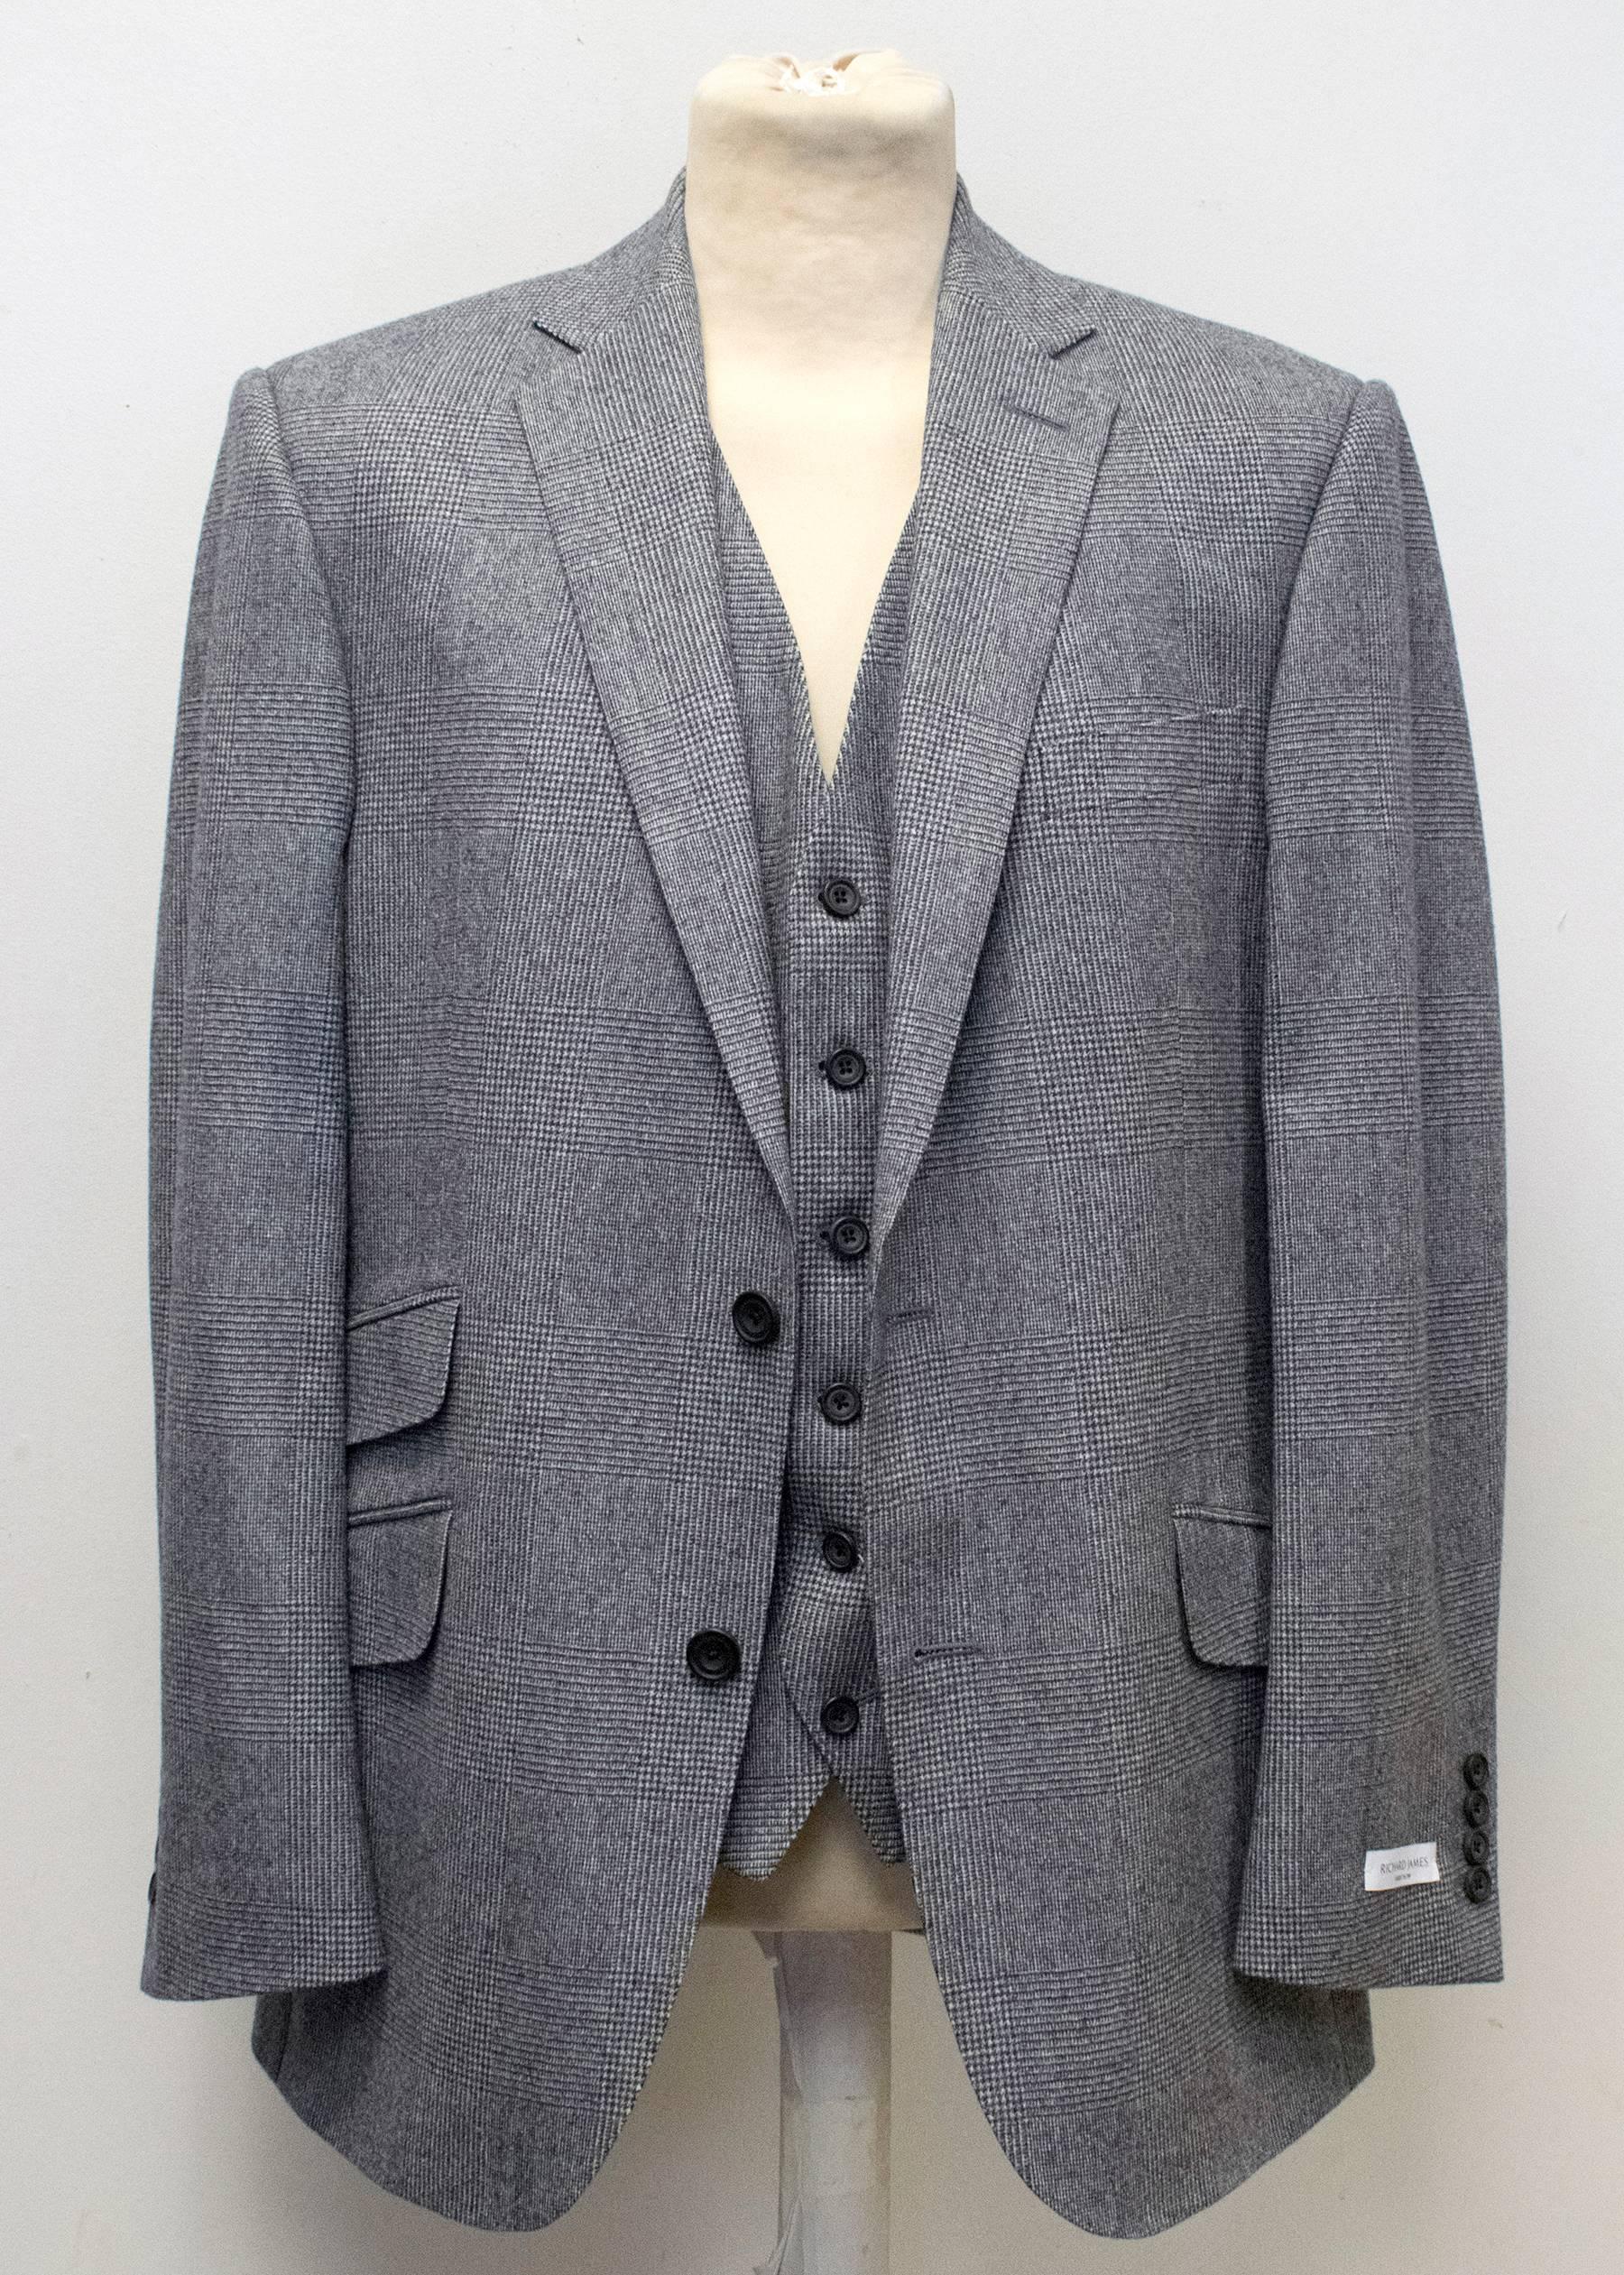 Richard James Grey Checked Three Piece Suit For Sale 5